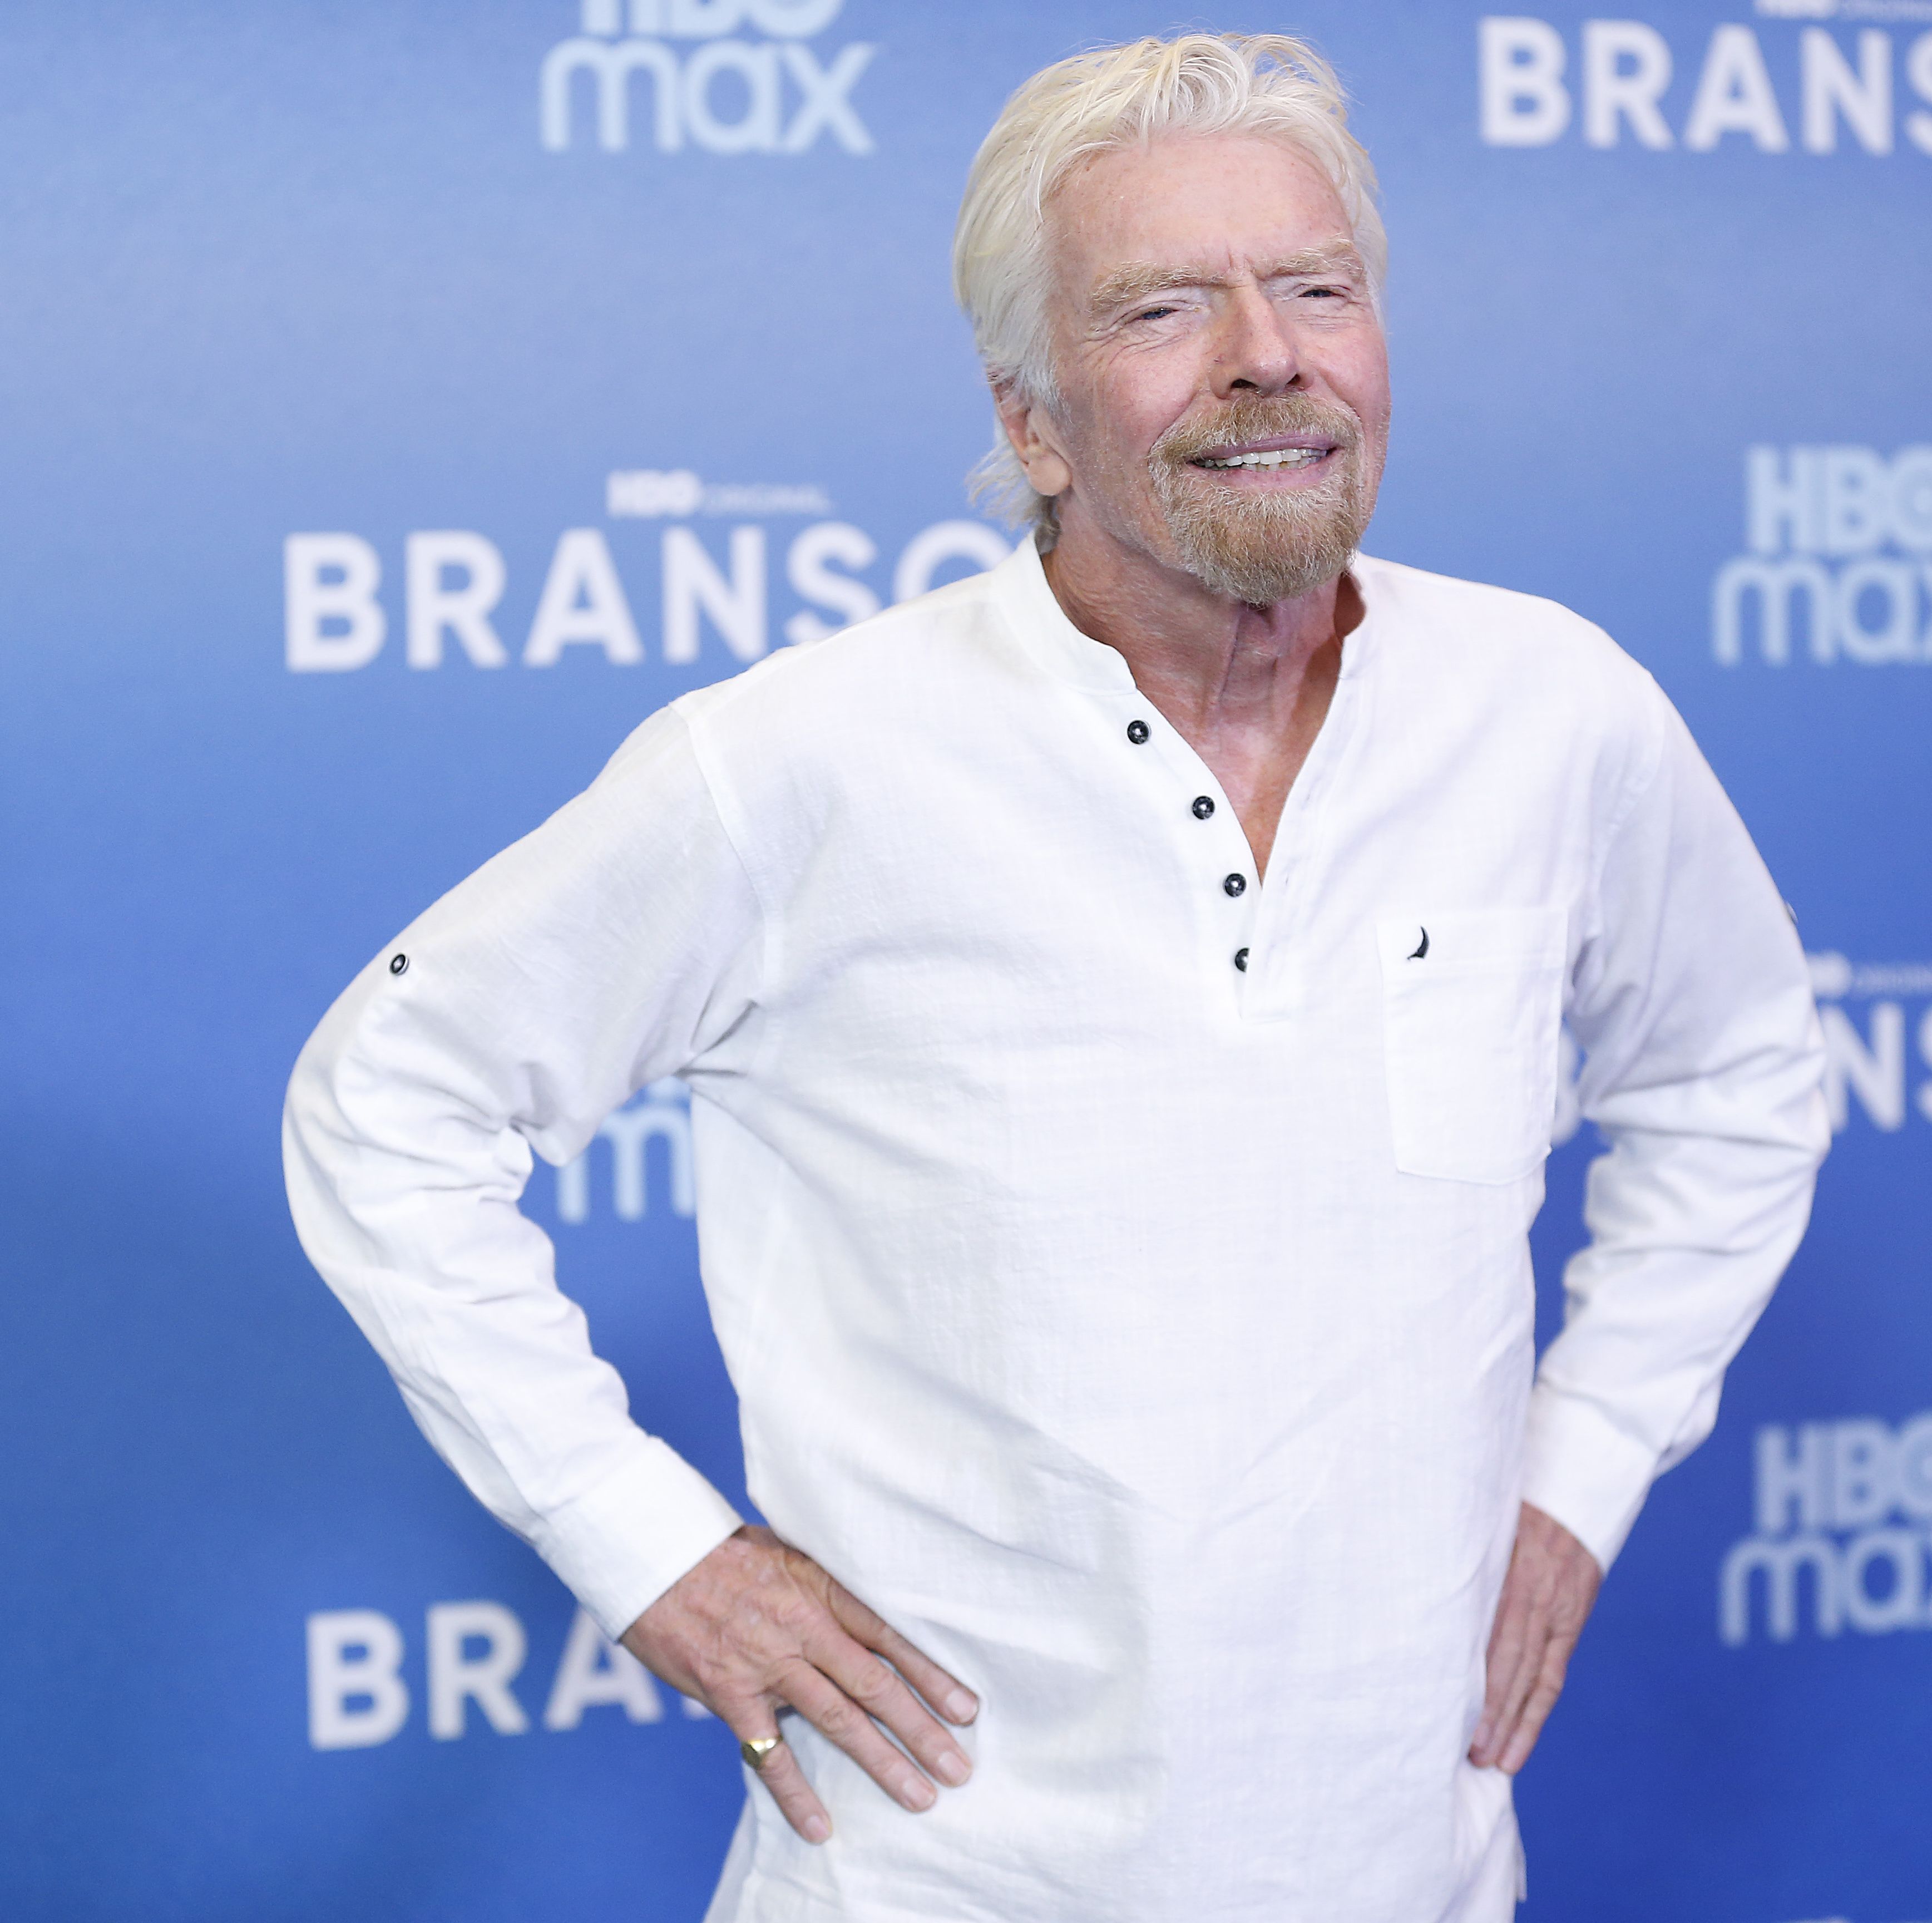 Richard Branson's Way to Get Daily Exercise Is Not What You'd Expect